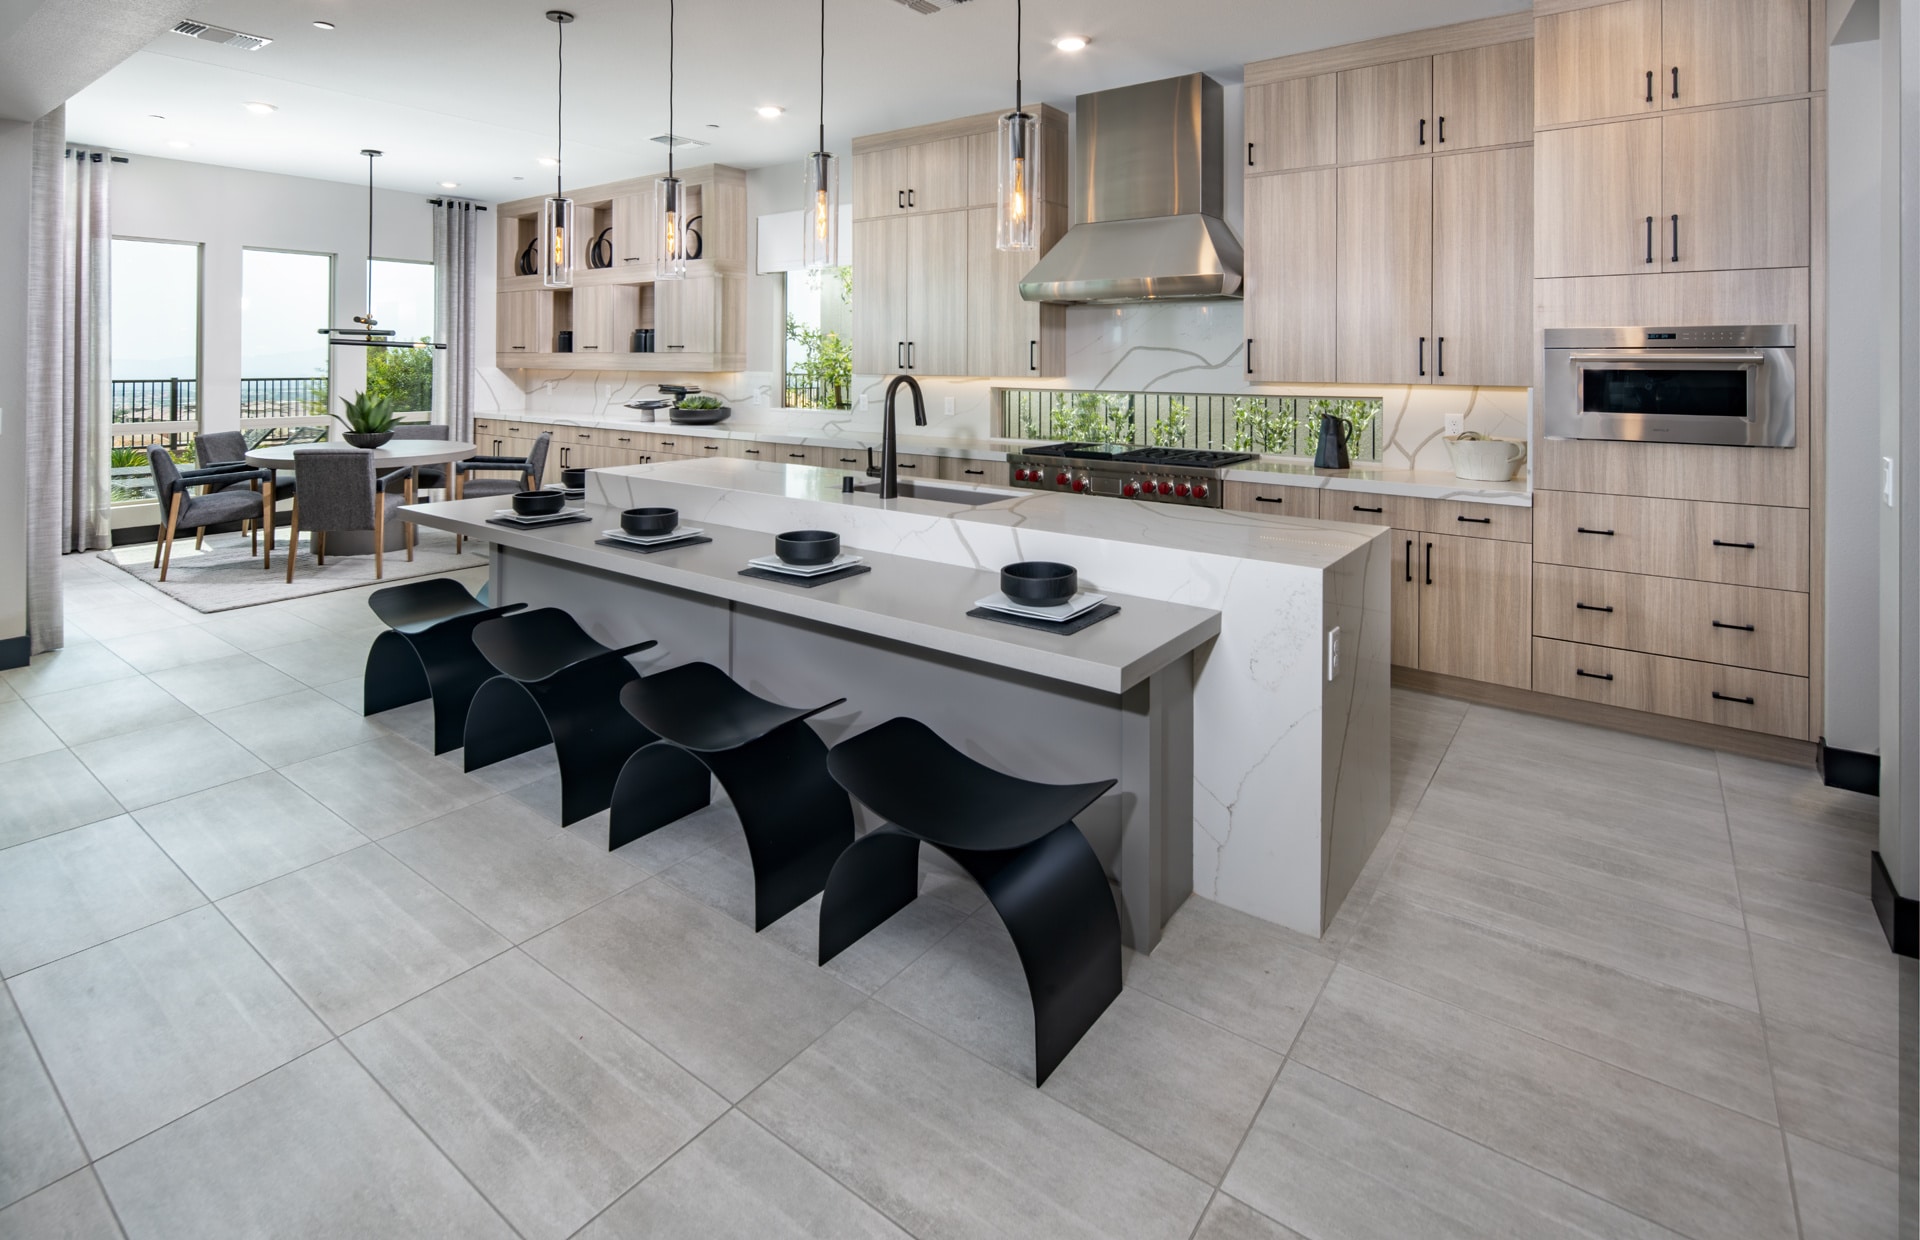 Kitchen of Vittoria Model at Carmel Cliff by Pulte Homes